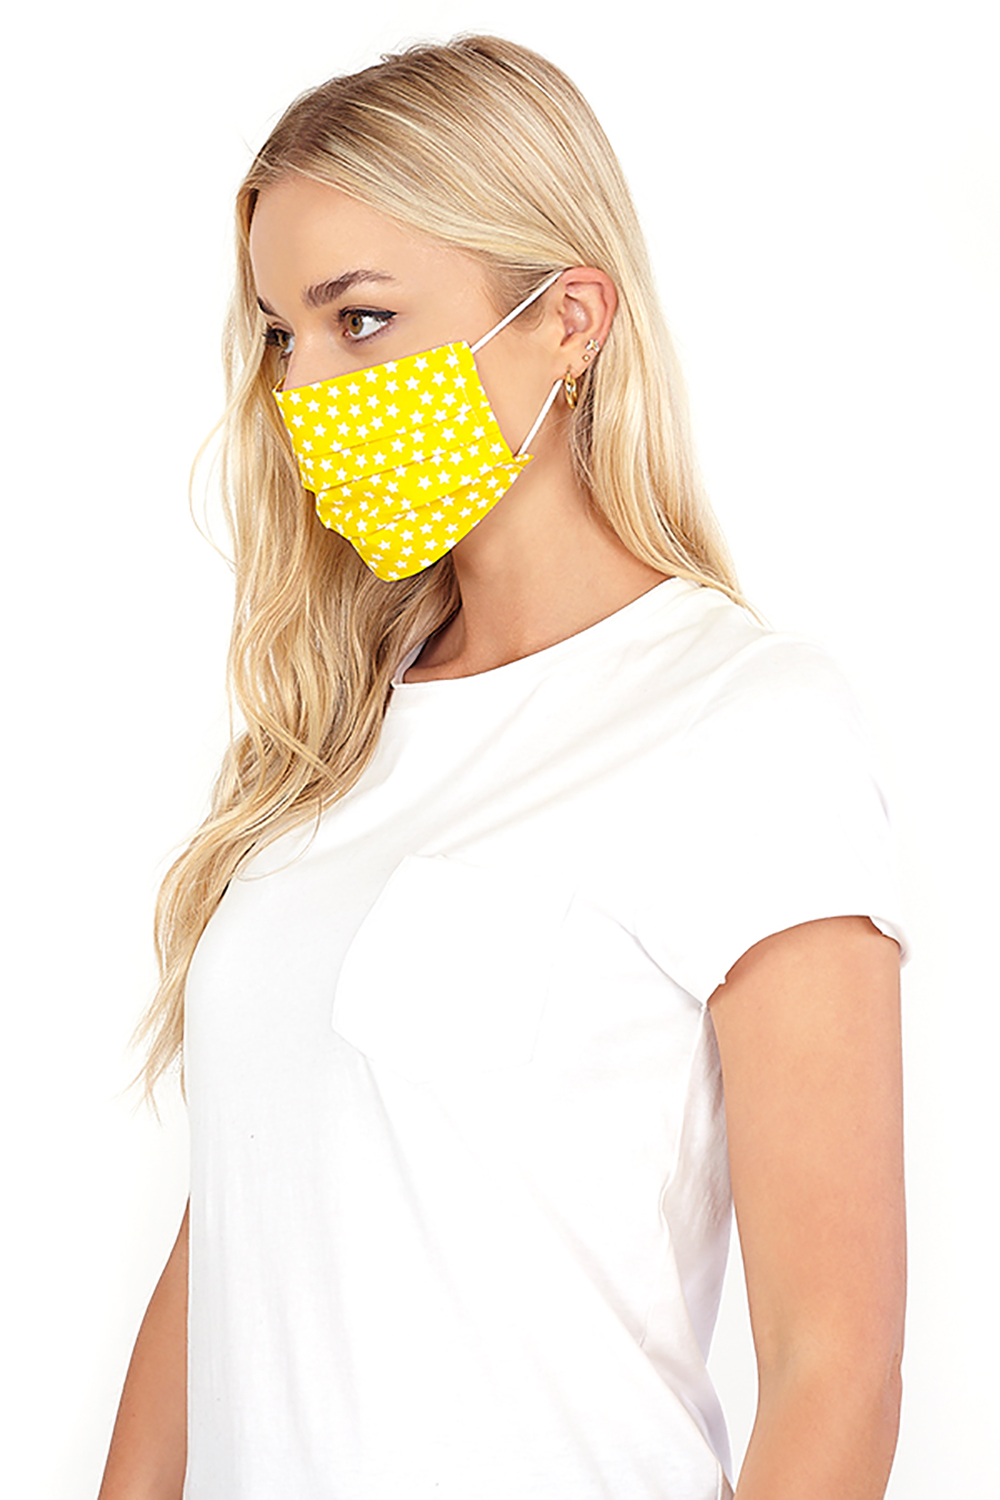 Star Print Fast Drying Fashion Face Mask